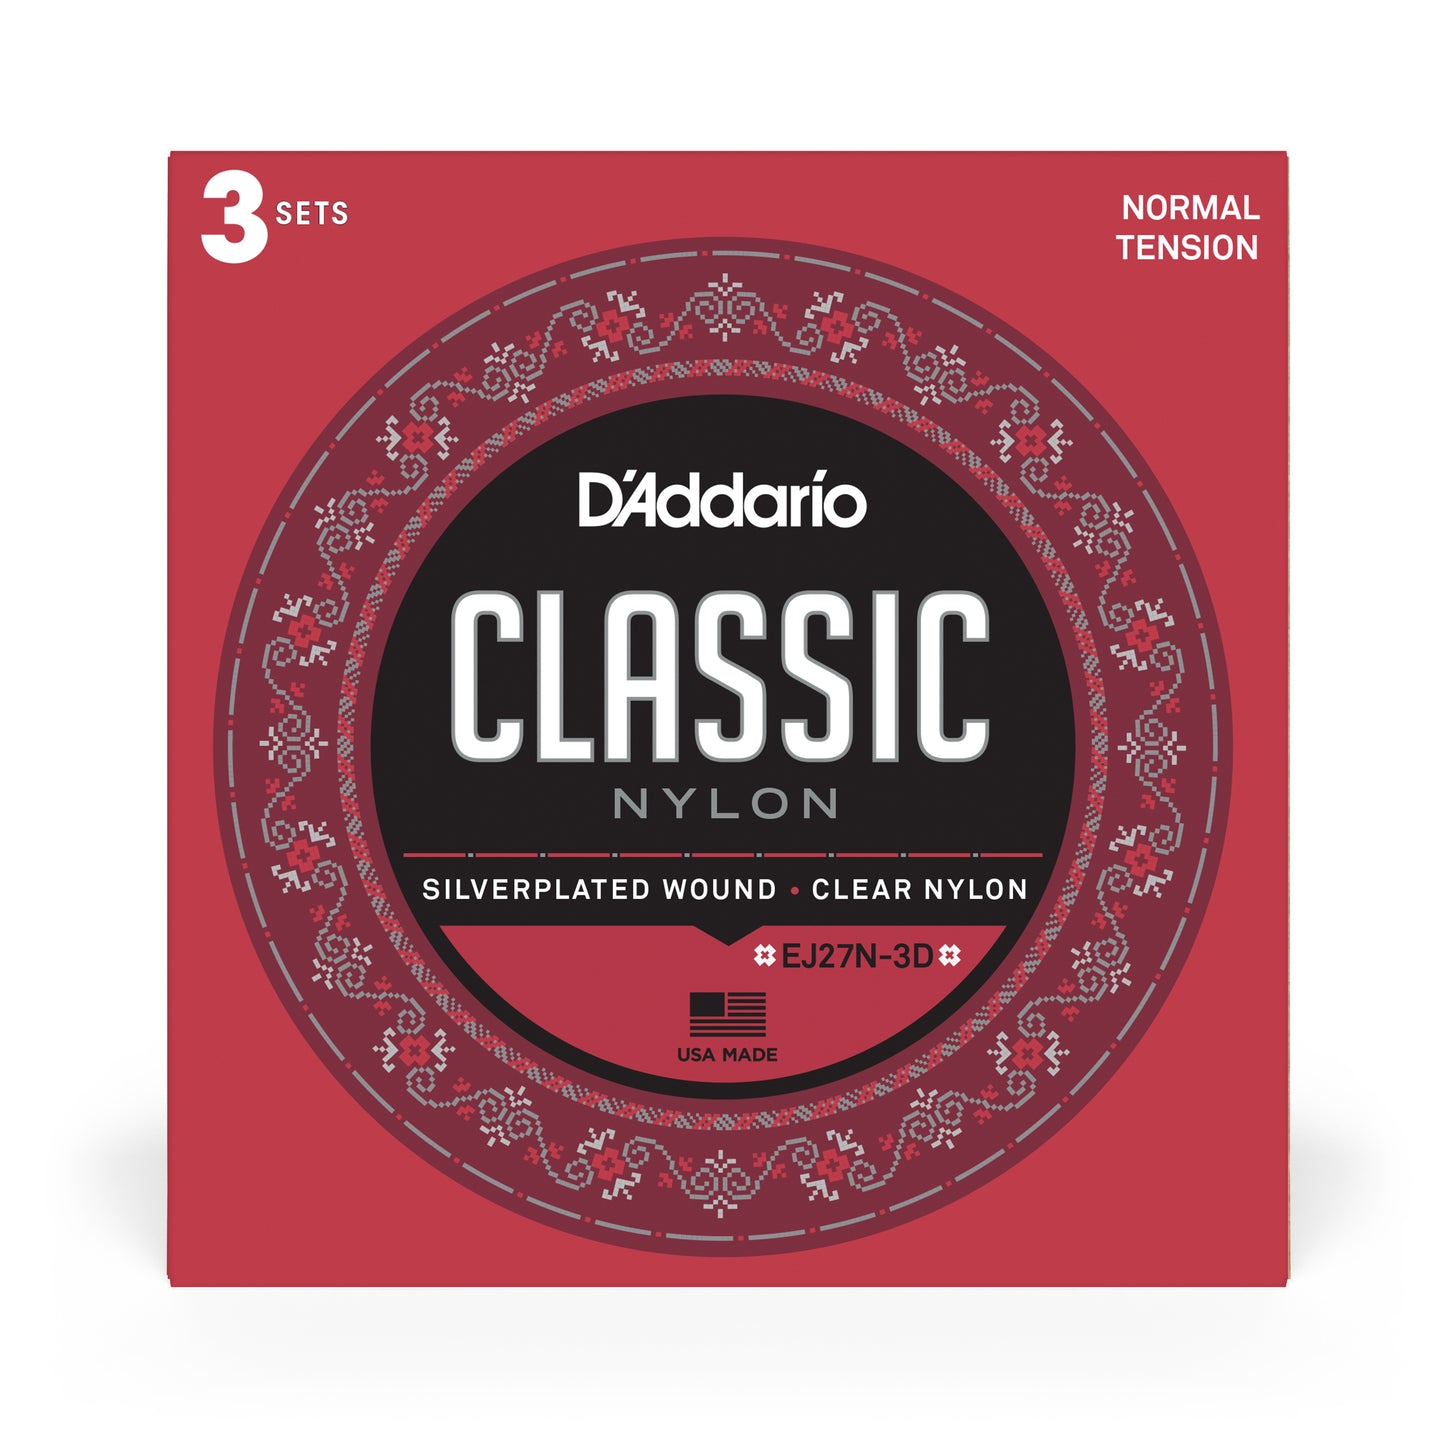 D'Addario Student Classical Nylon Strings (Normal Tension) 3 Pack